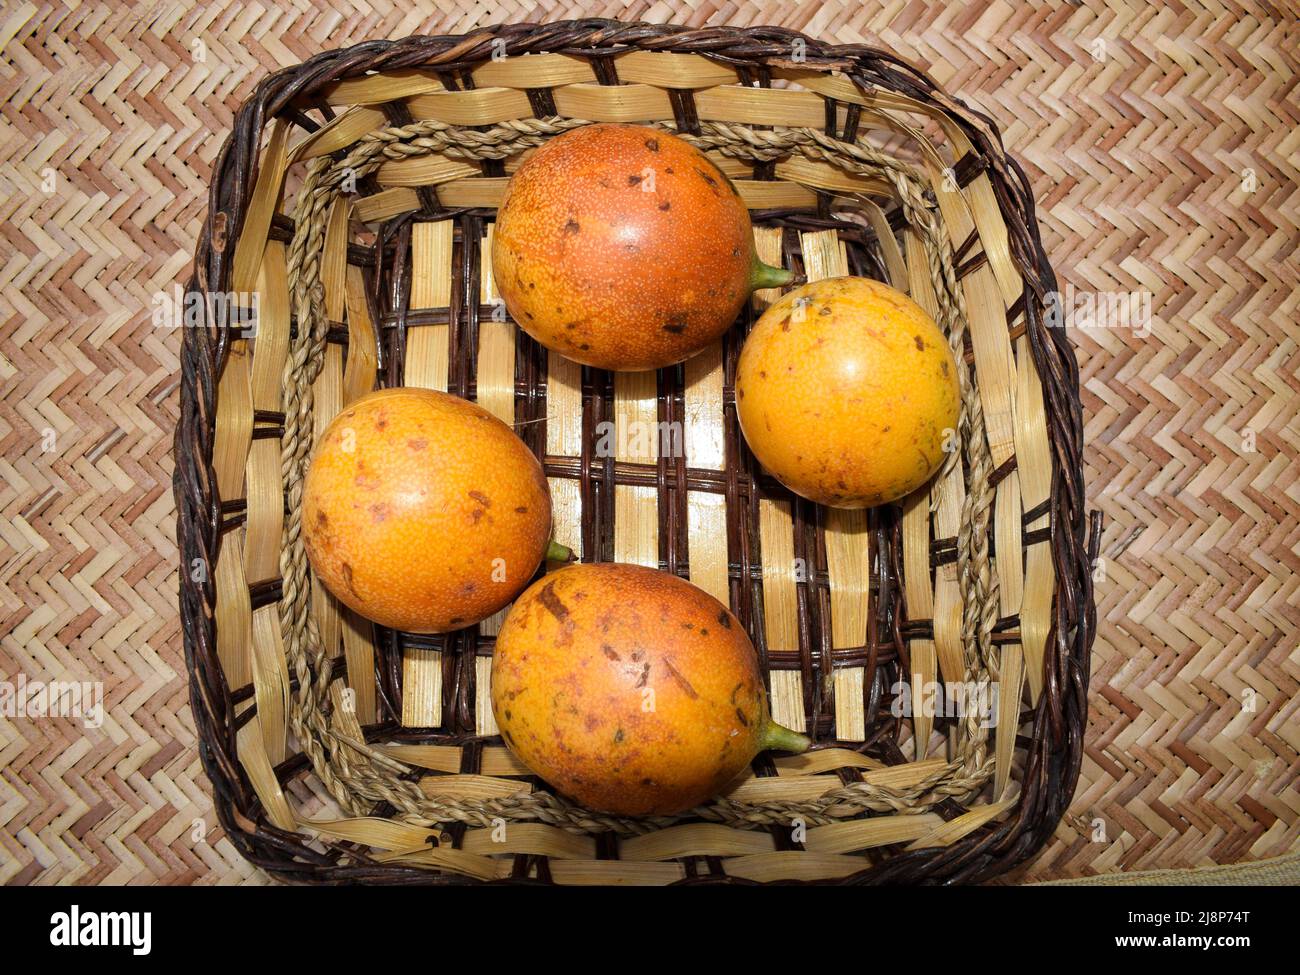 Passionfruits in wicker basket. yellow Passionfruit. Delicious passion fruits in basket Passionfruit Stock Photo